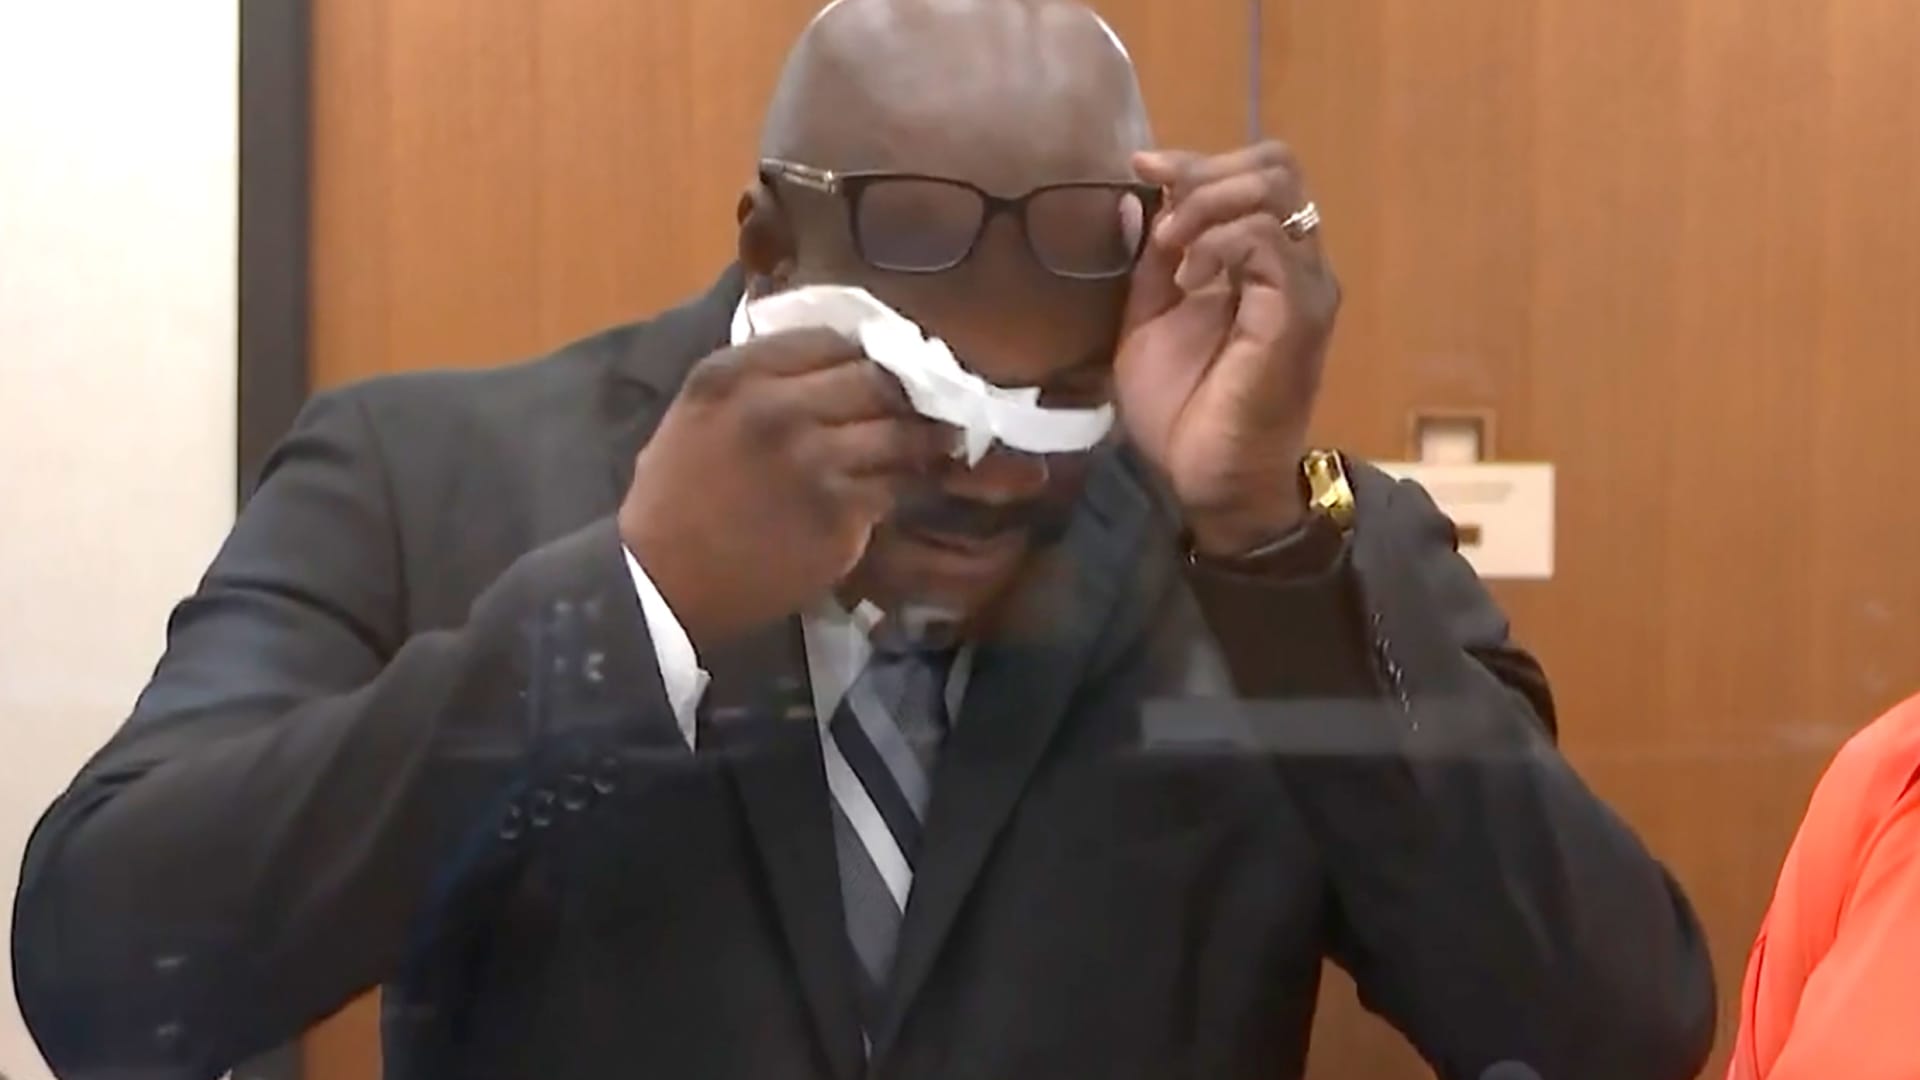 In this image taken from video, Philonise Floyd, brother of George Floyd, becomes emotional during victim impact statements as Hennepin County Judge Peter Cahill presides over sentencing, Friday, June 25, 2021, at the Hennepin County Courthouse in Minneapolis, in the trial of former Minneapolis police officer Derek Chauvin, who was convicted in the May 25, 2020, death of George Floyd.